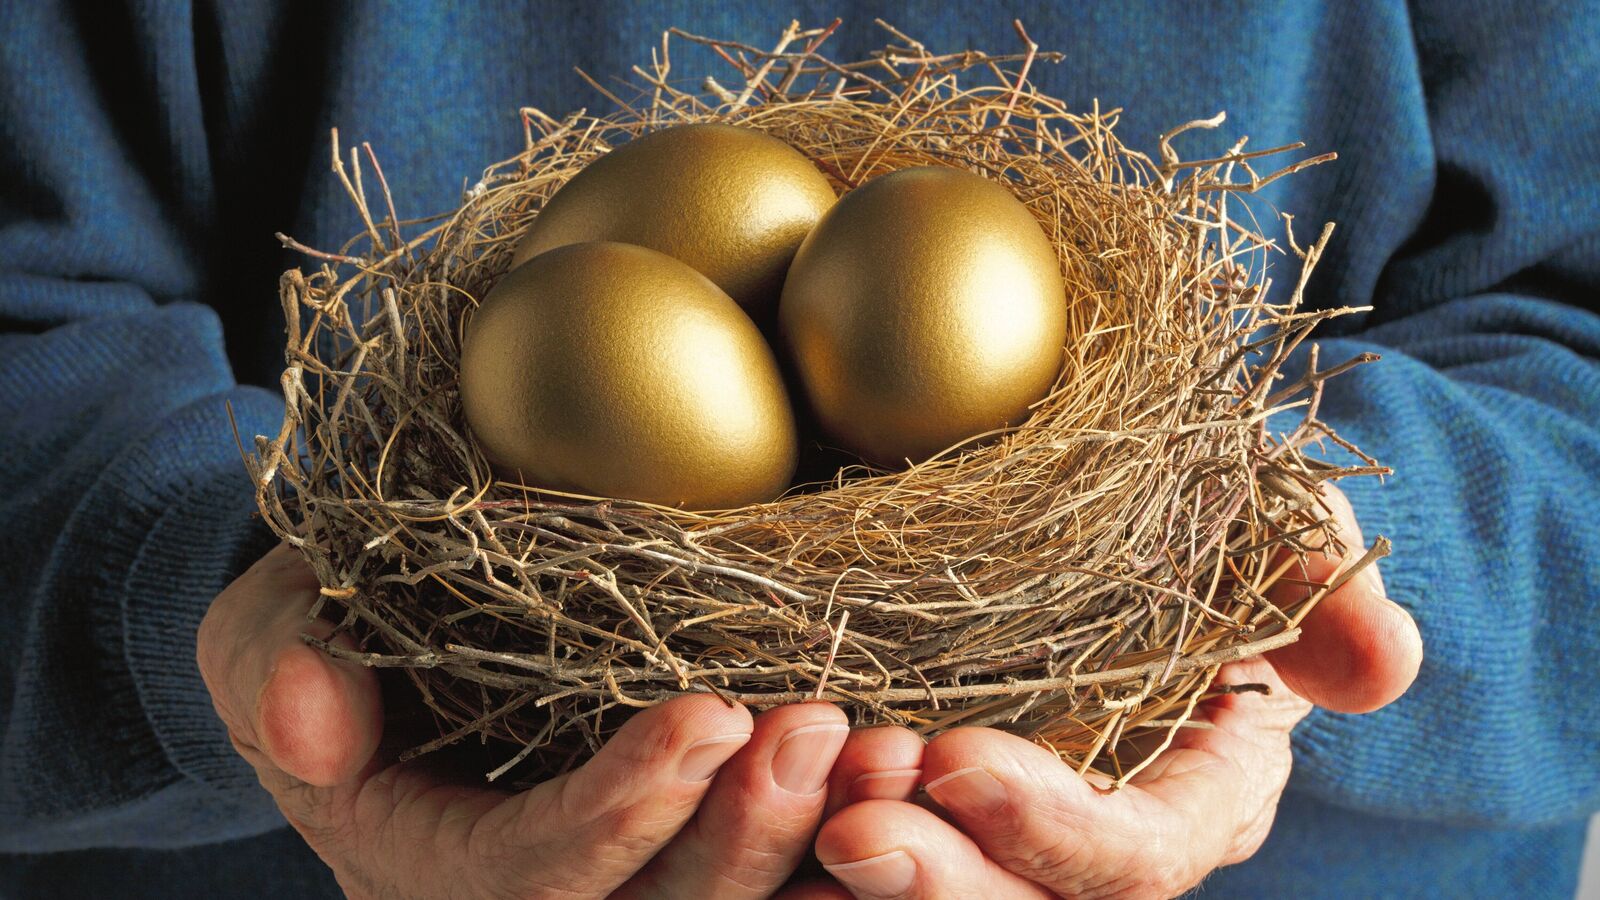 How to save for retirement: Investment tips for moderate risk takers